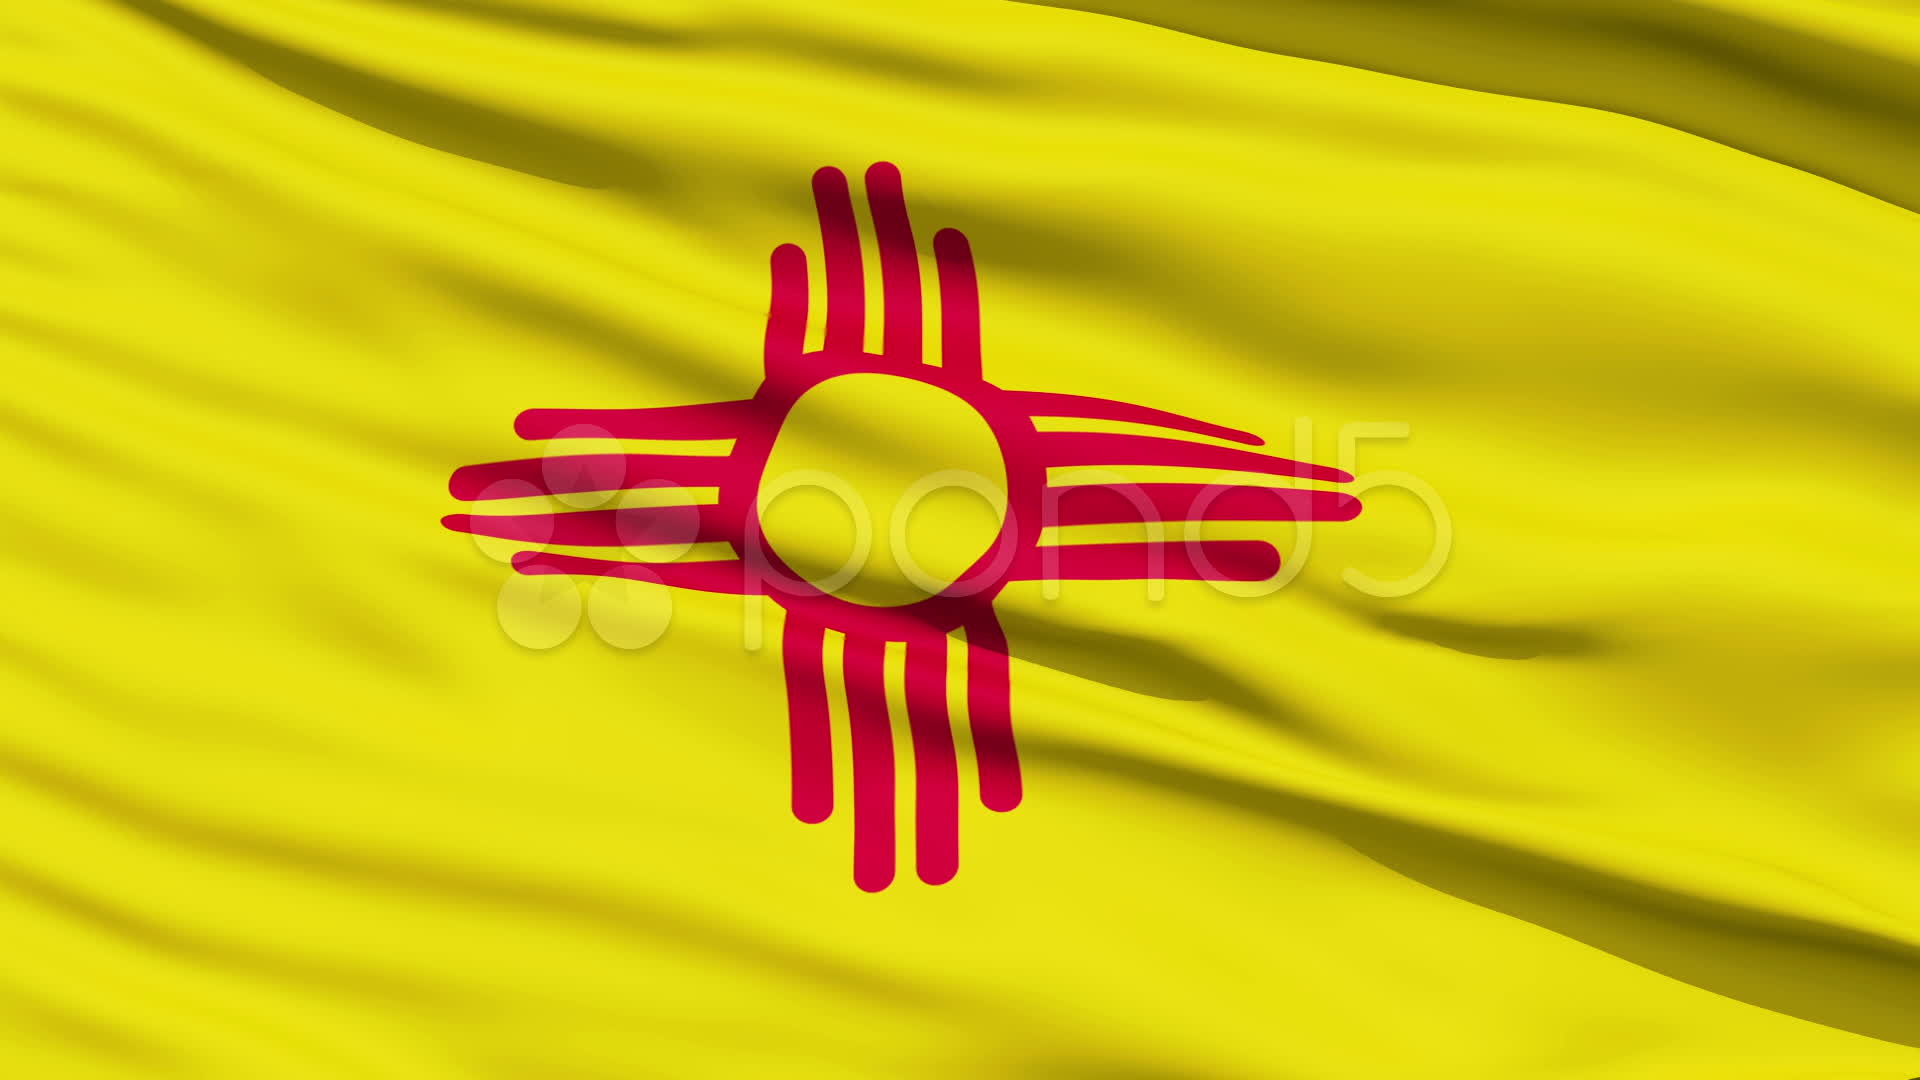 1920x1080 new mexico flag wallpaper Image Gallery new mexico flag wallpaper